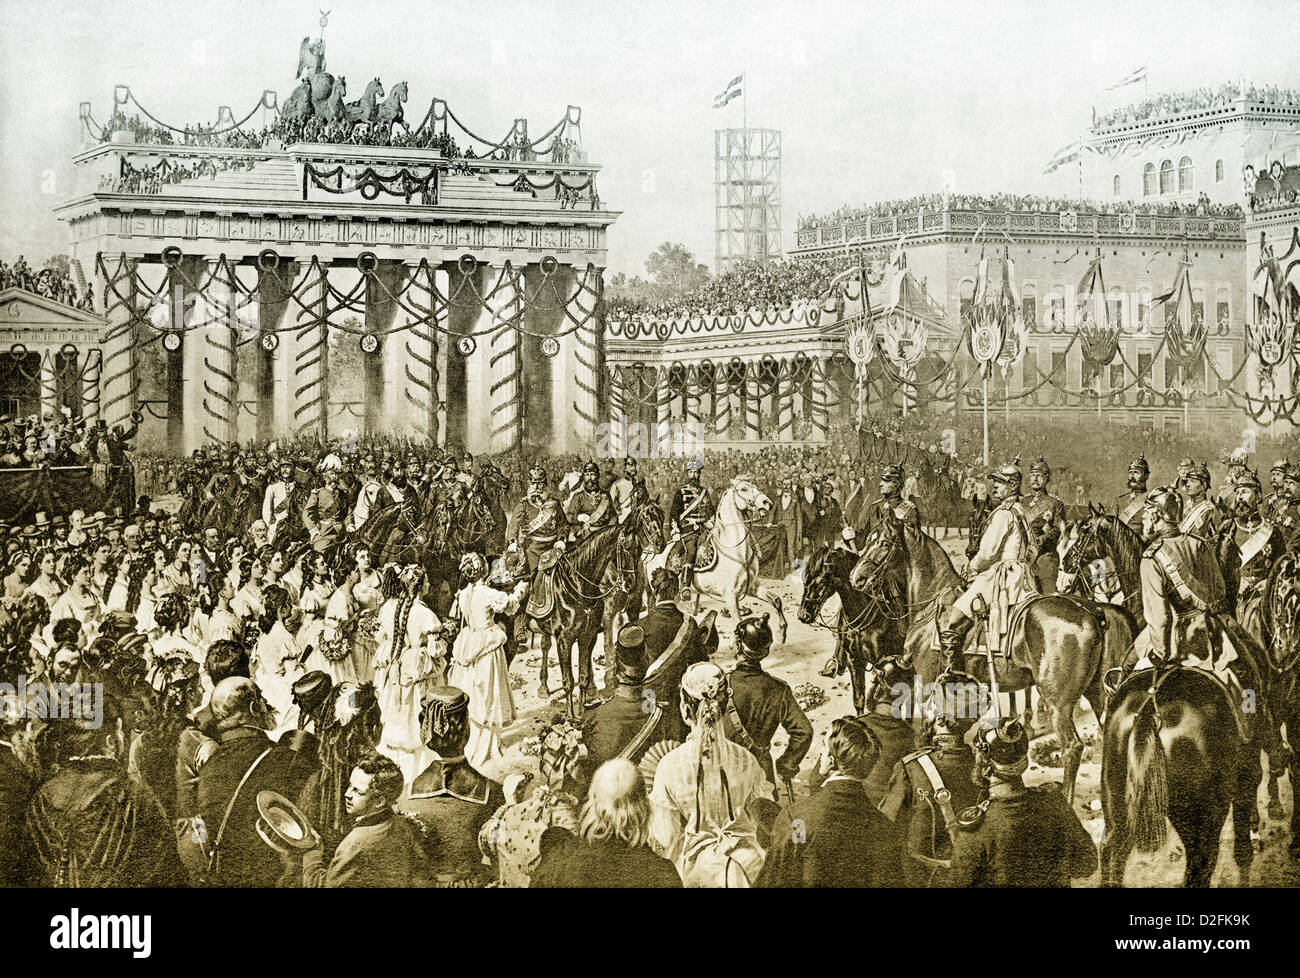 Triumphal procession of the Prussian troops, Brandenburg Gate, Berlin1871, Germany, end of the Franco-Prussian War, 1870-1871 Stock Photo